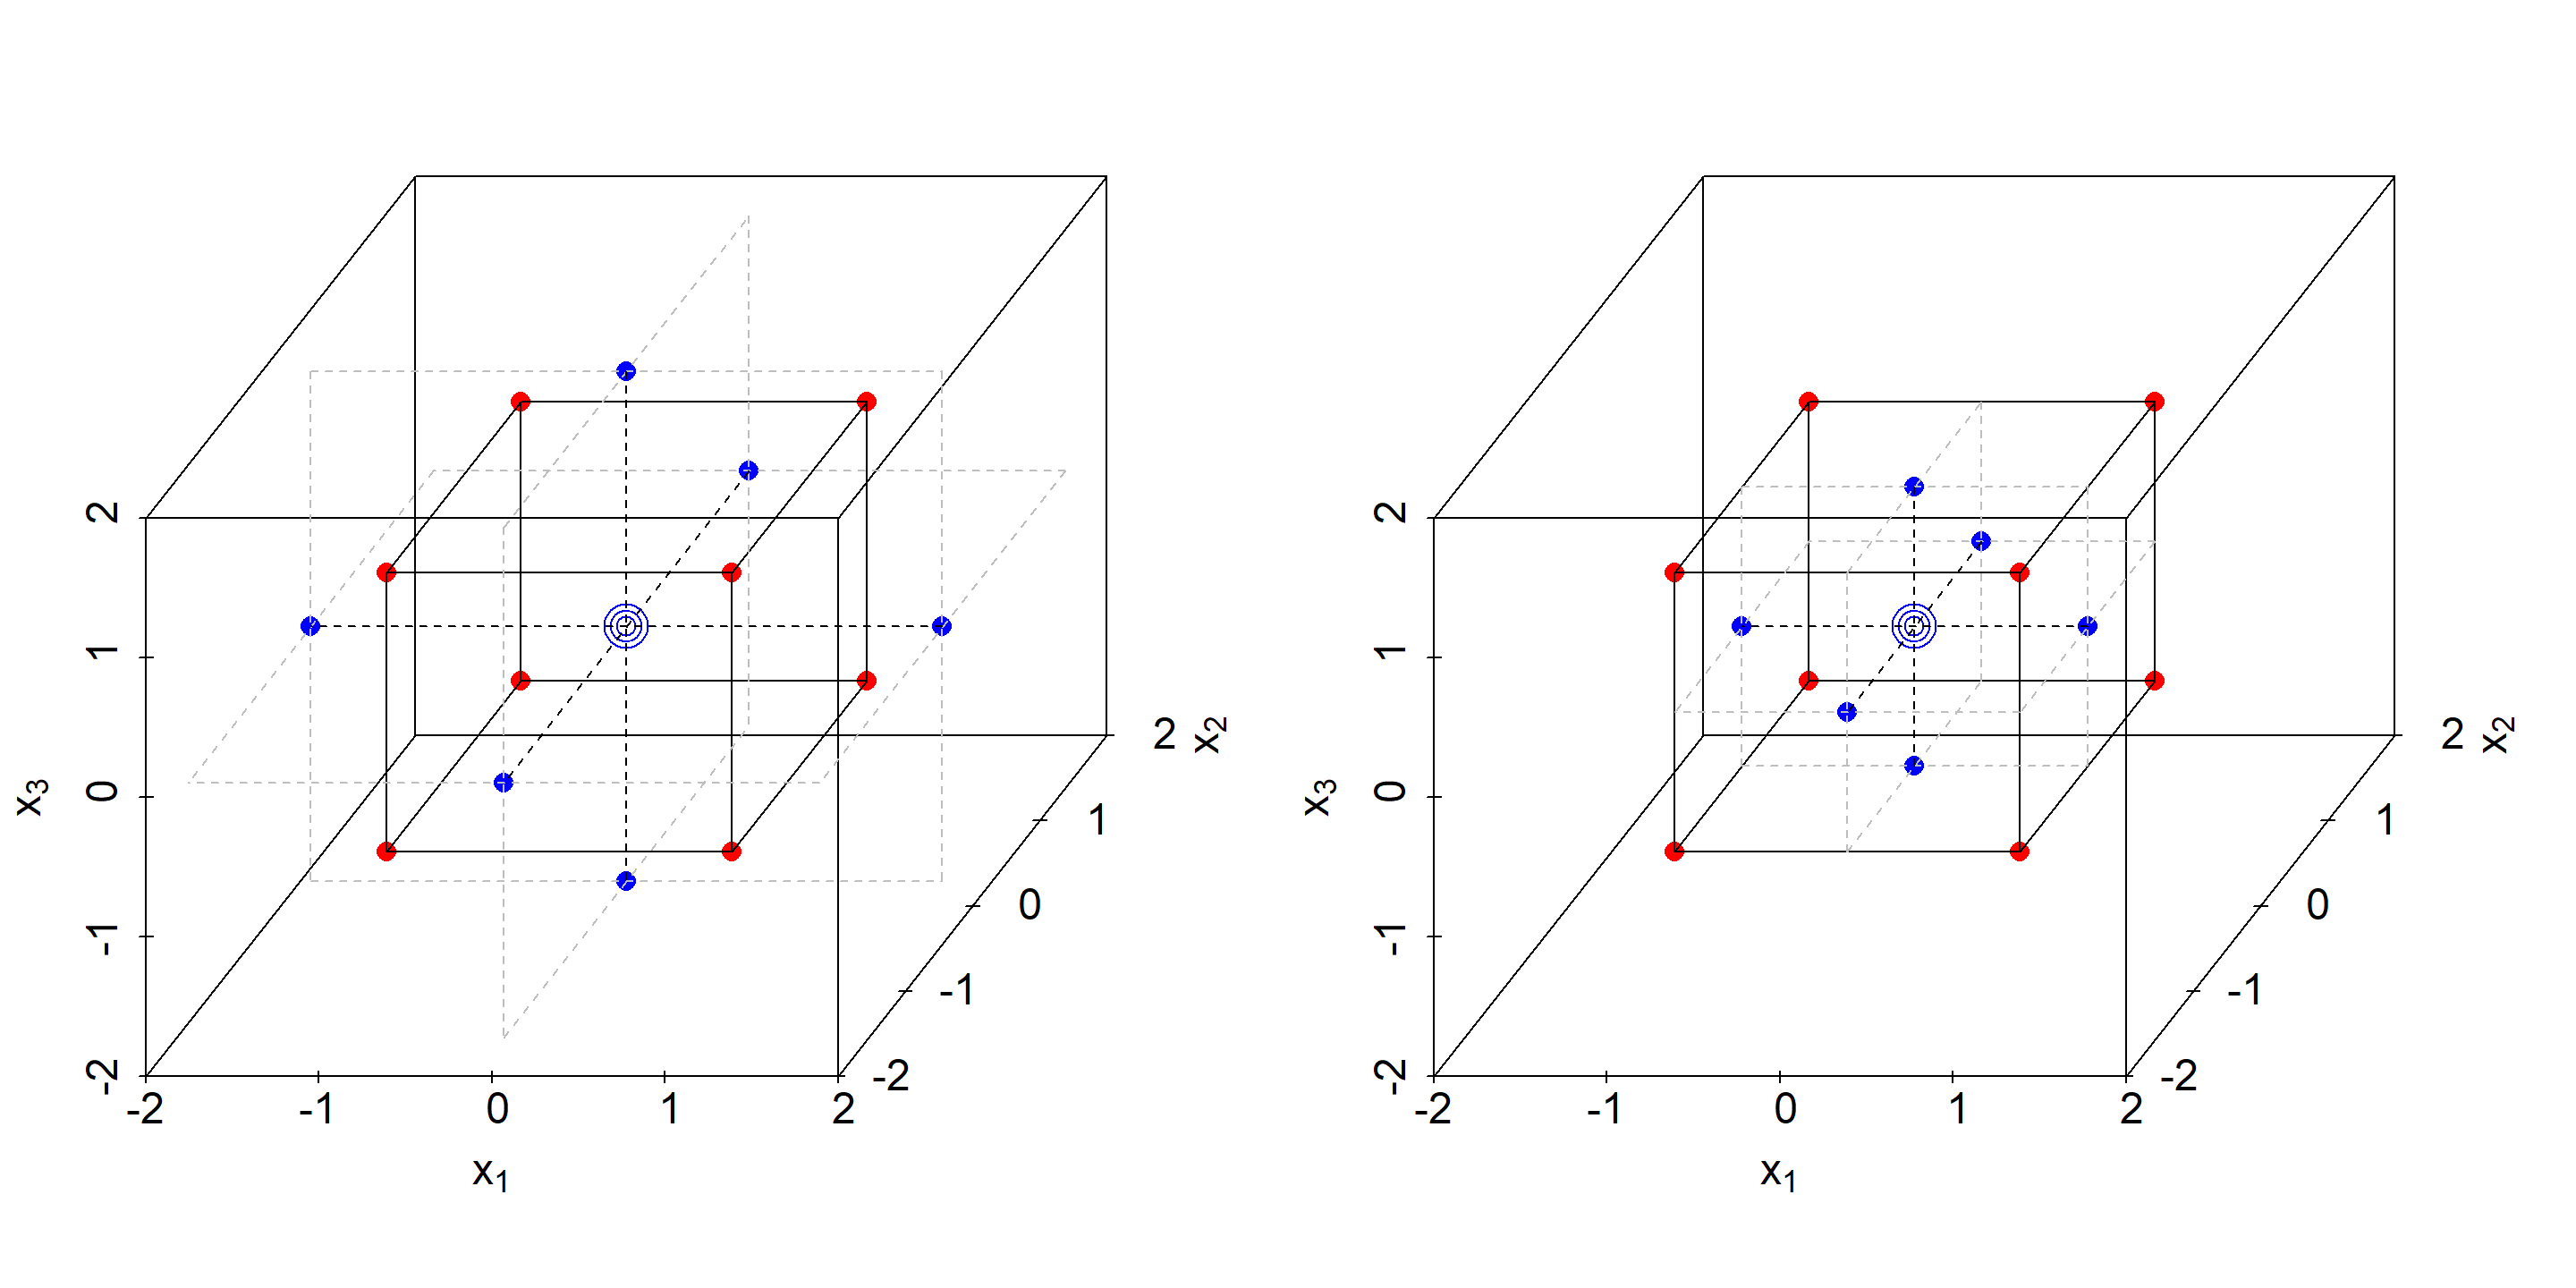 Central-Composite-Circumscribed (CCC, left panel) and Central-Composite Face-centered (CCF, right panel) designs for K=3 in coded units